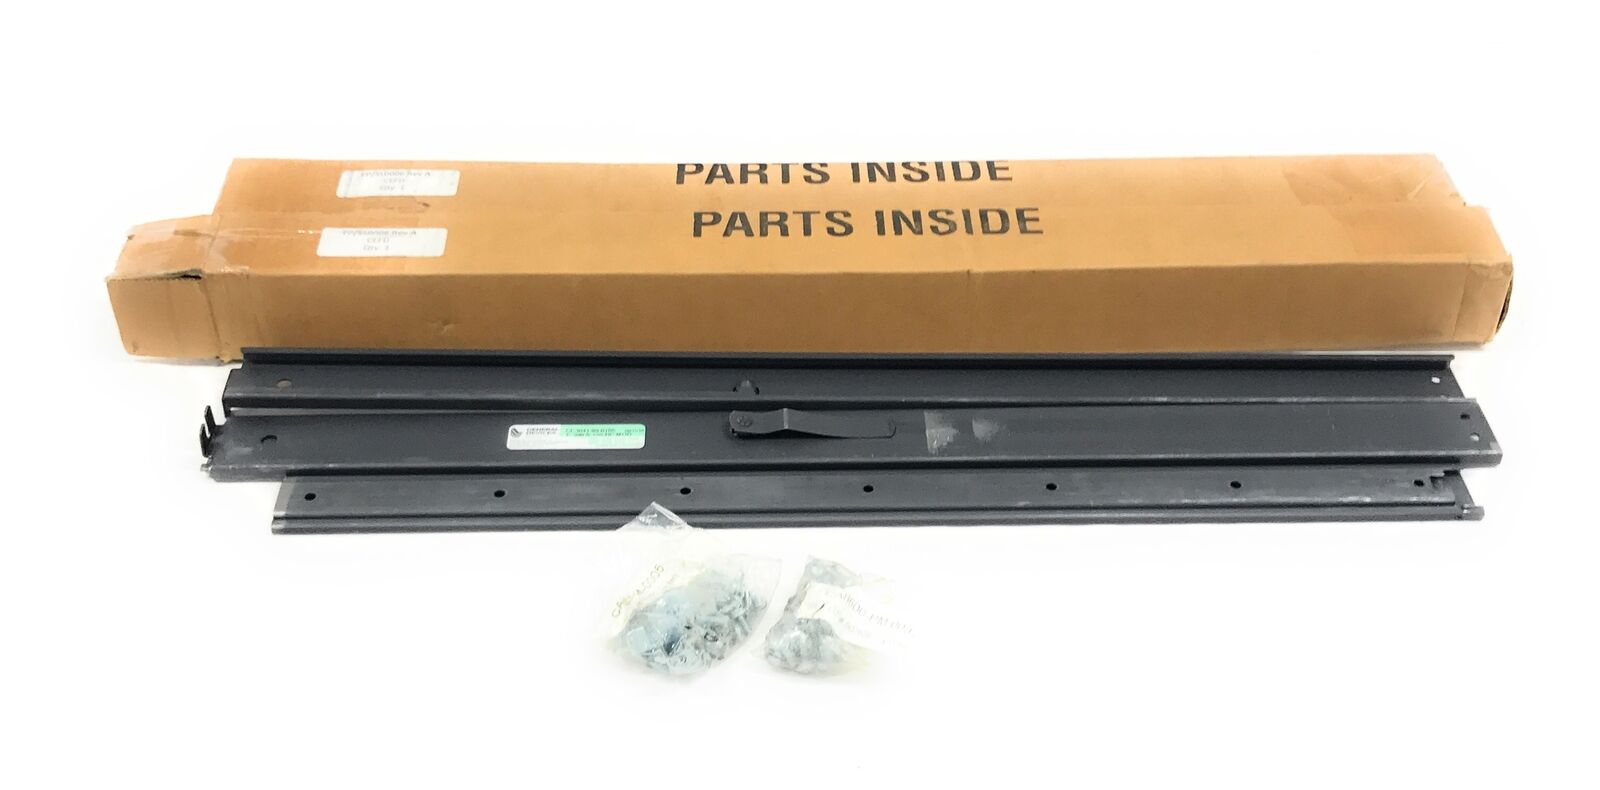 Lot of 2 - NEW OPEN BOX General Devices Rack Mount Slide Kit C-300-S-124